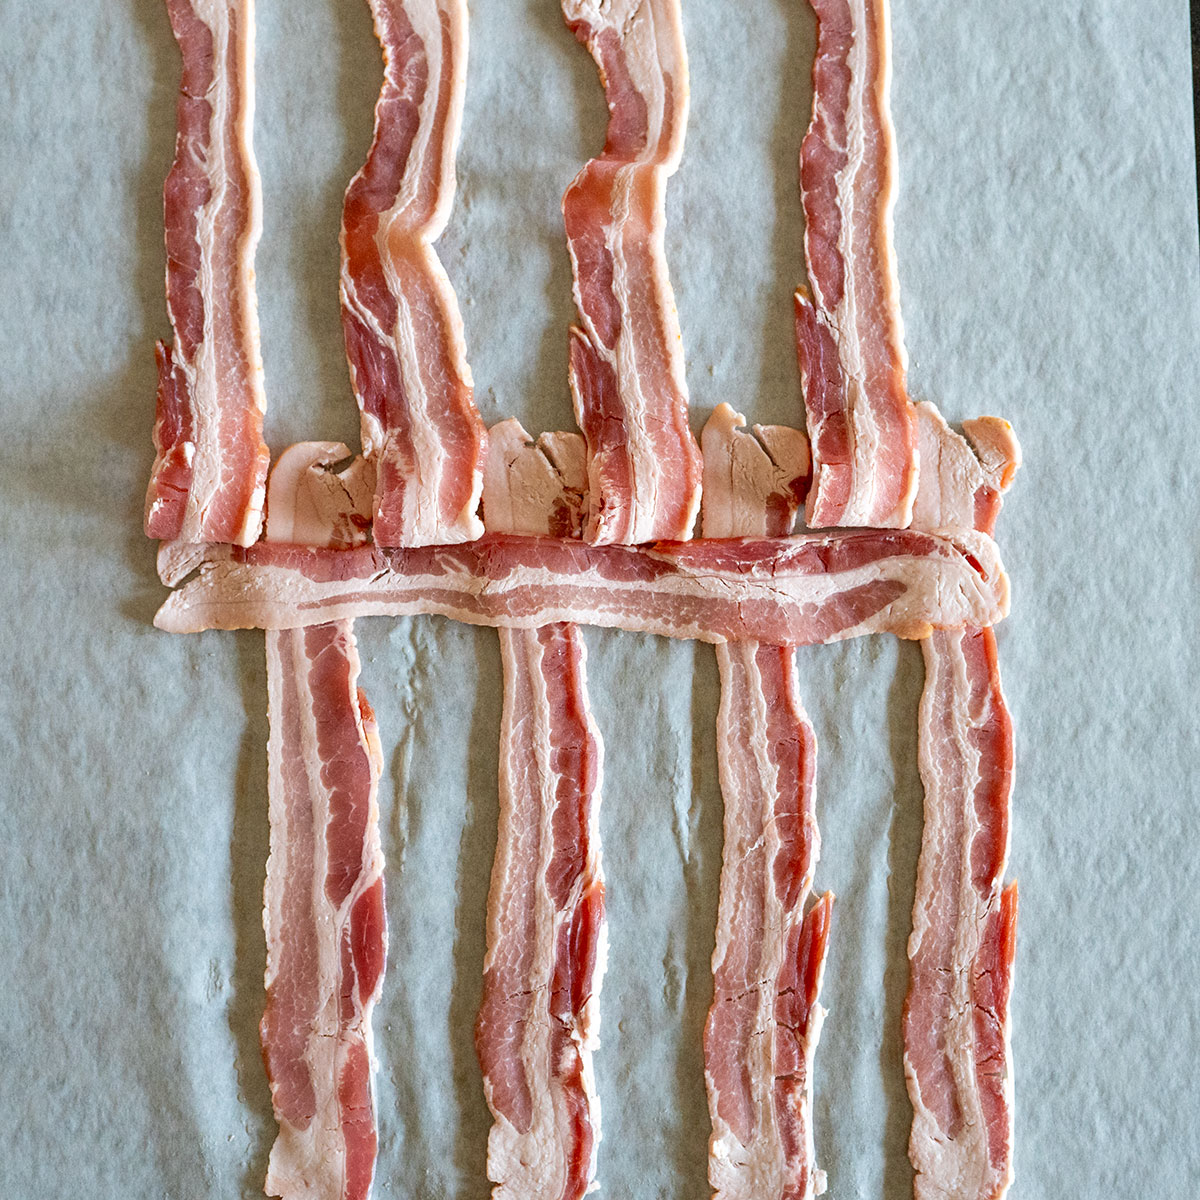 odd pieces of bacon folded back with one strip laying across strips that are down.